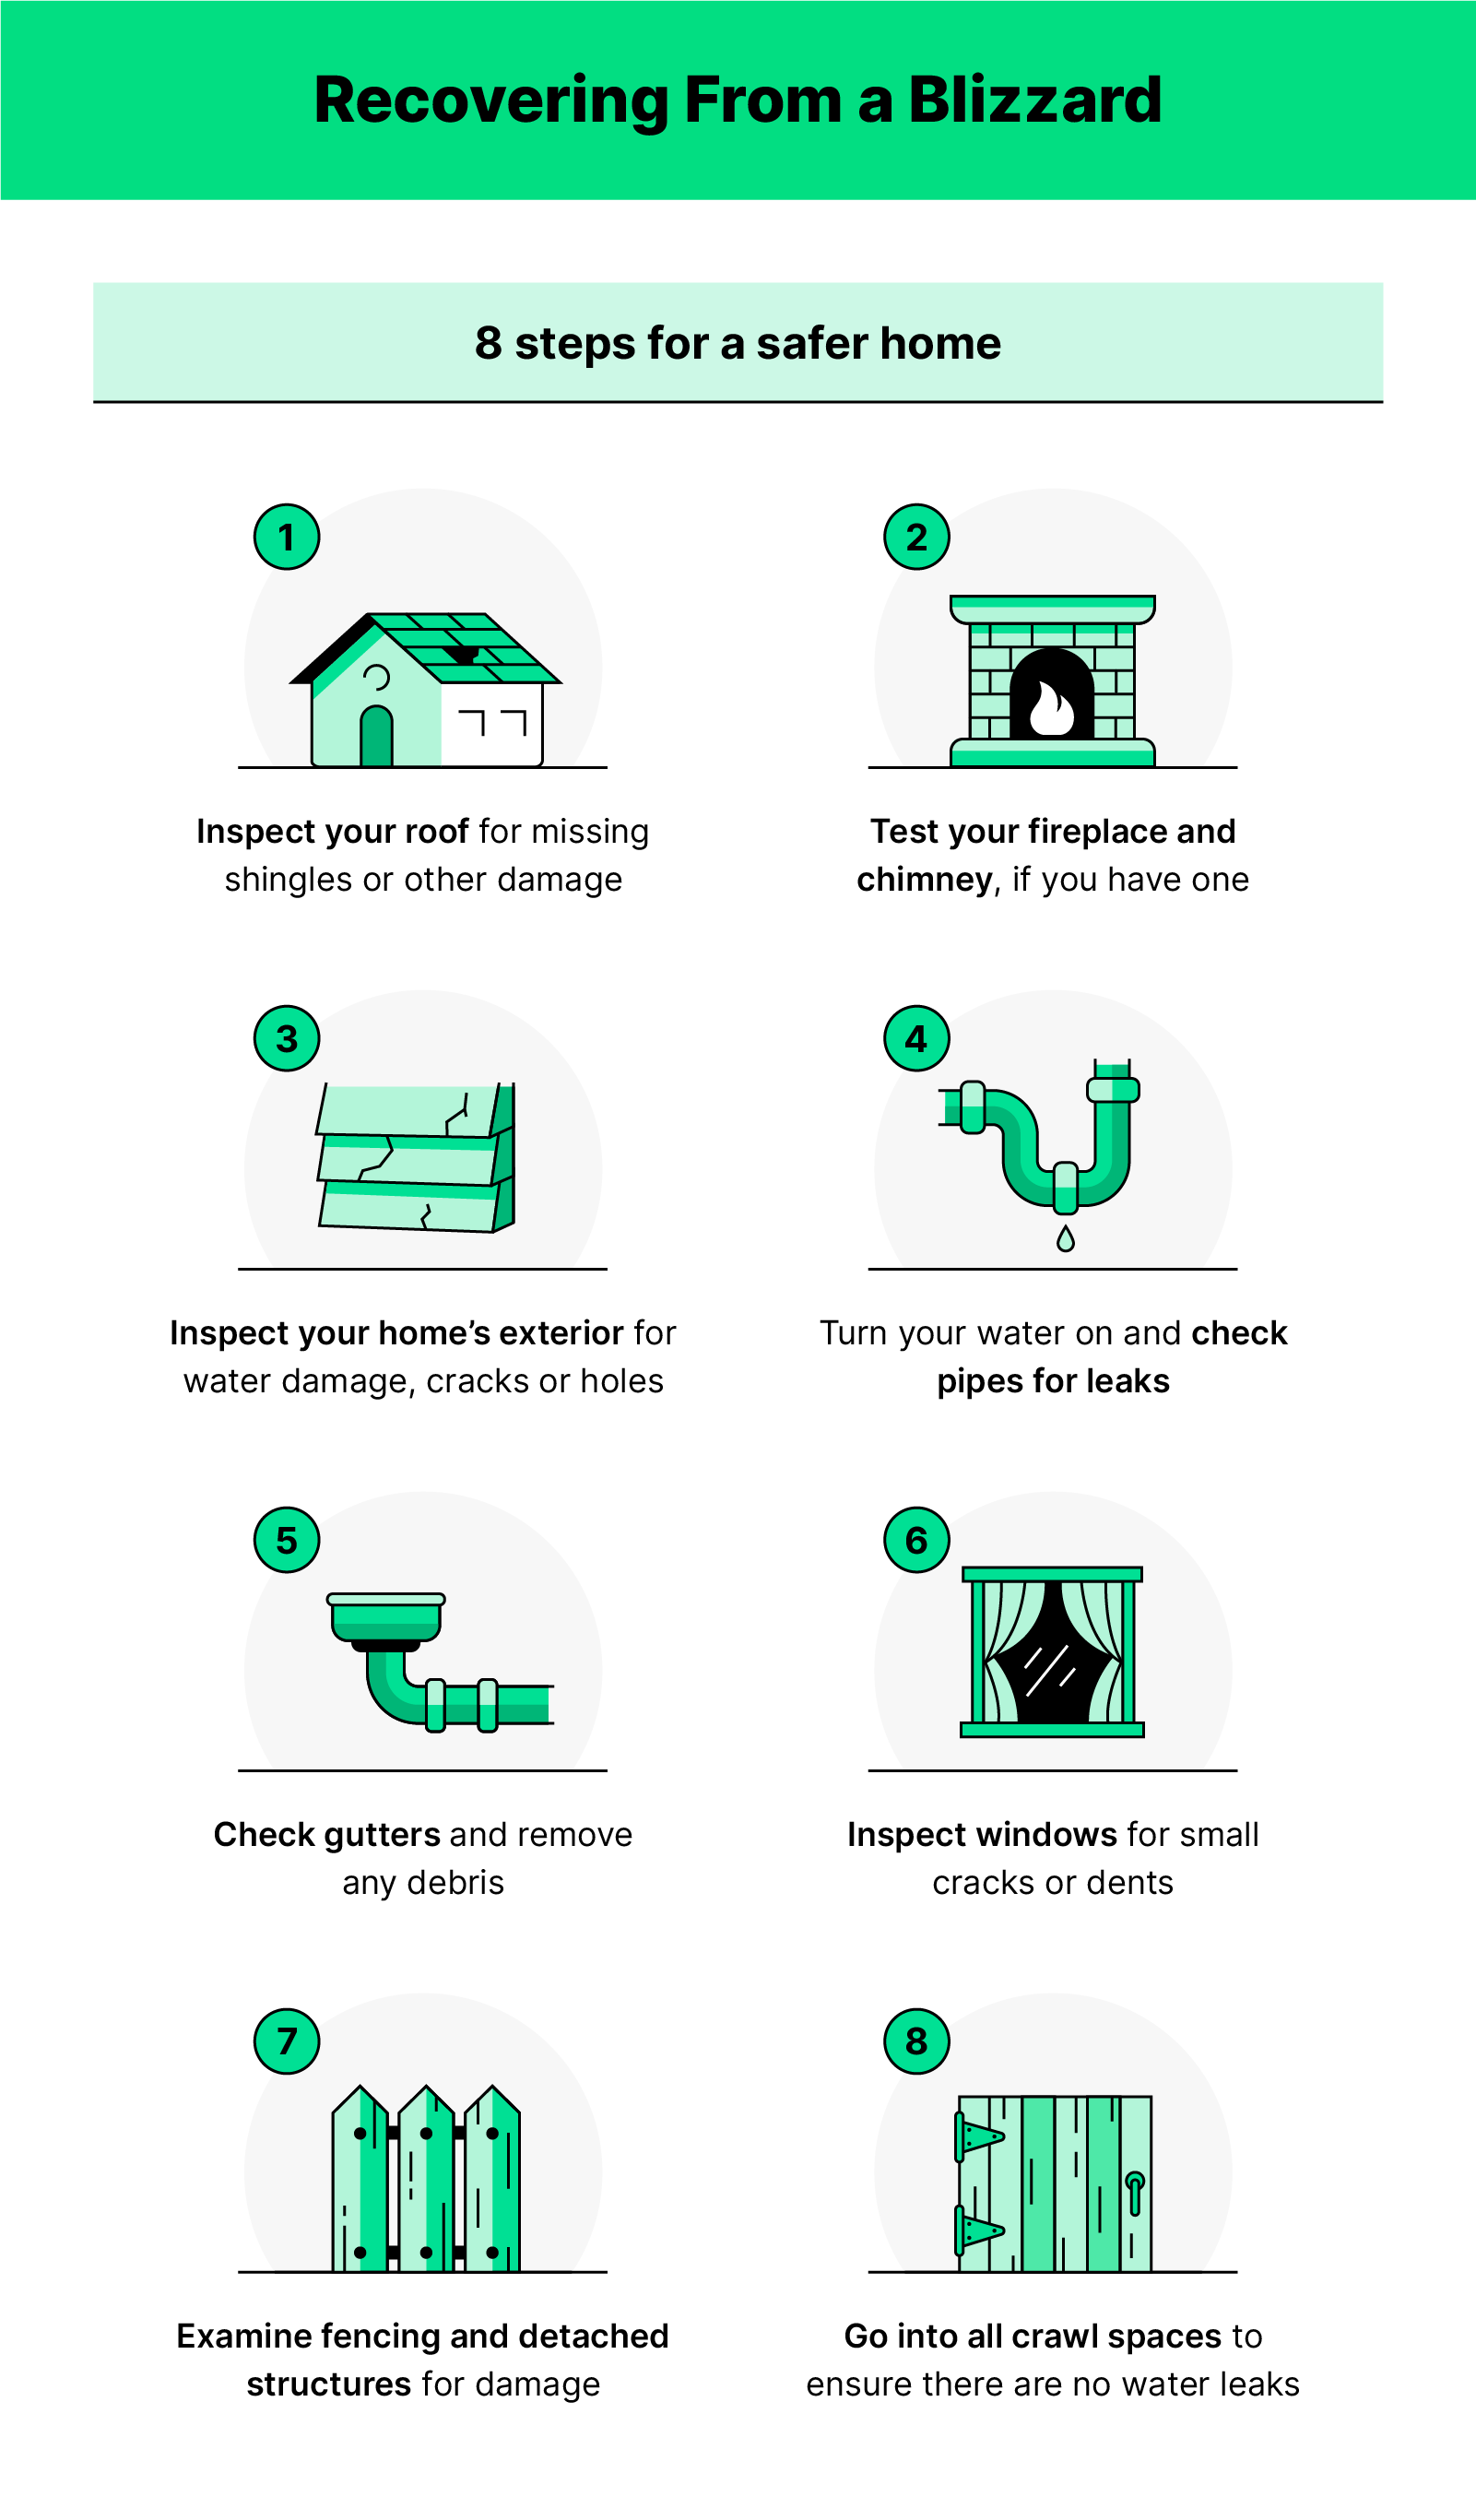 Green black and white illustrations of different parts of a home